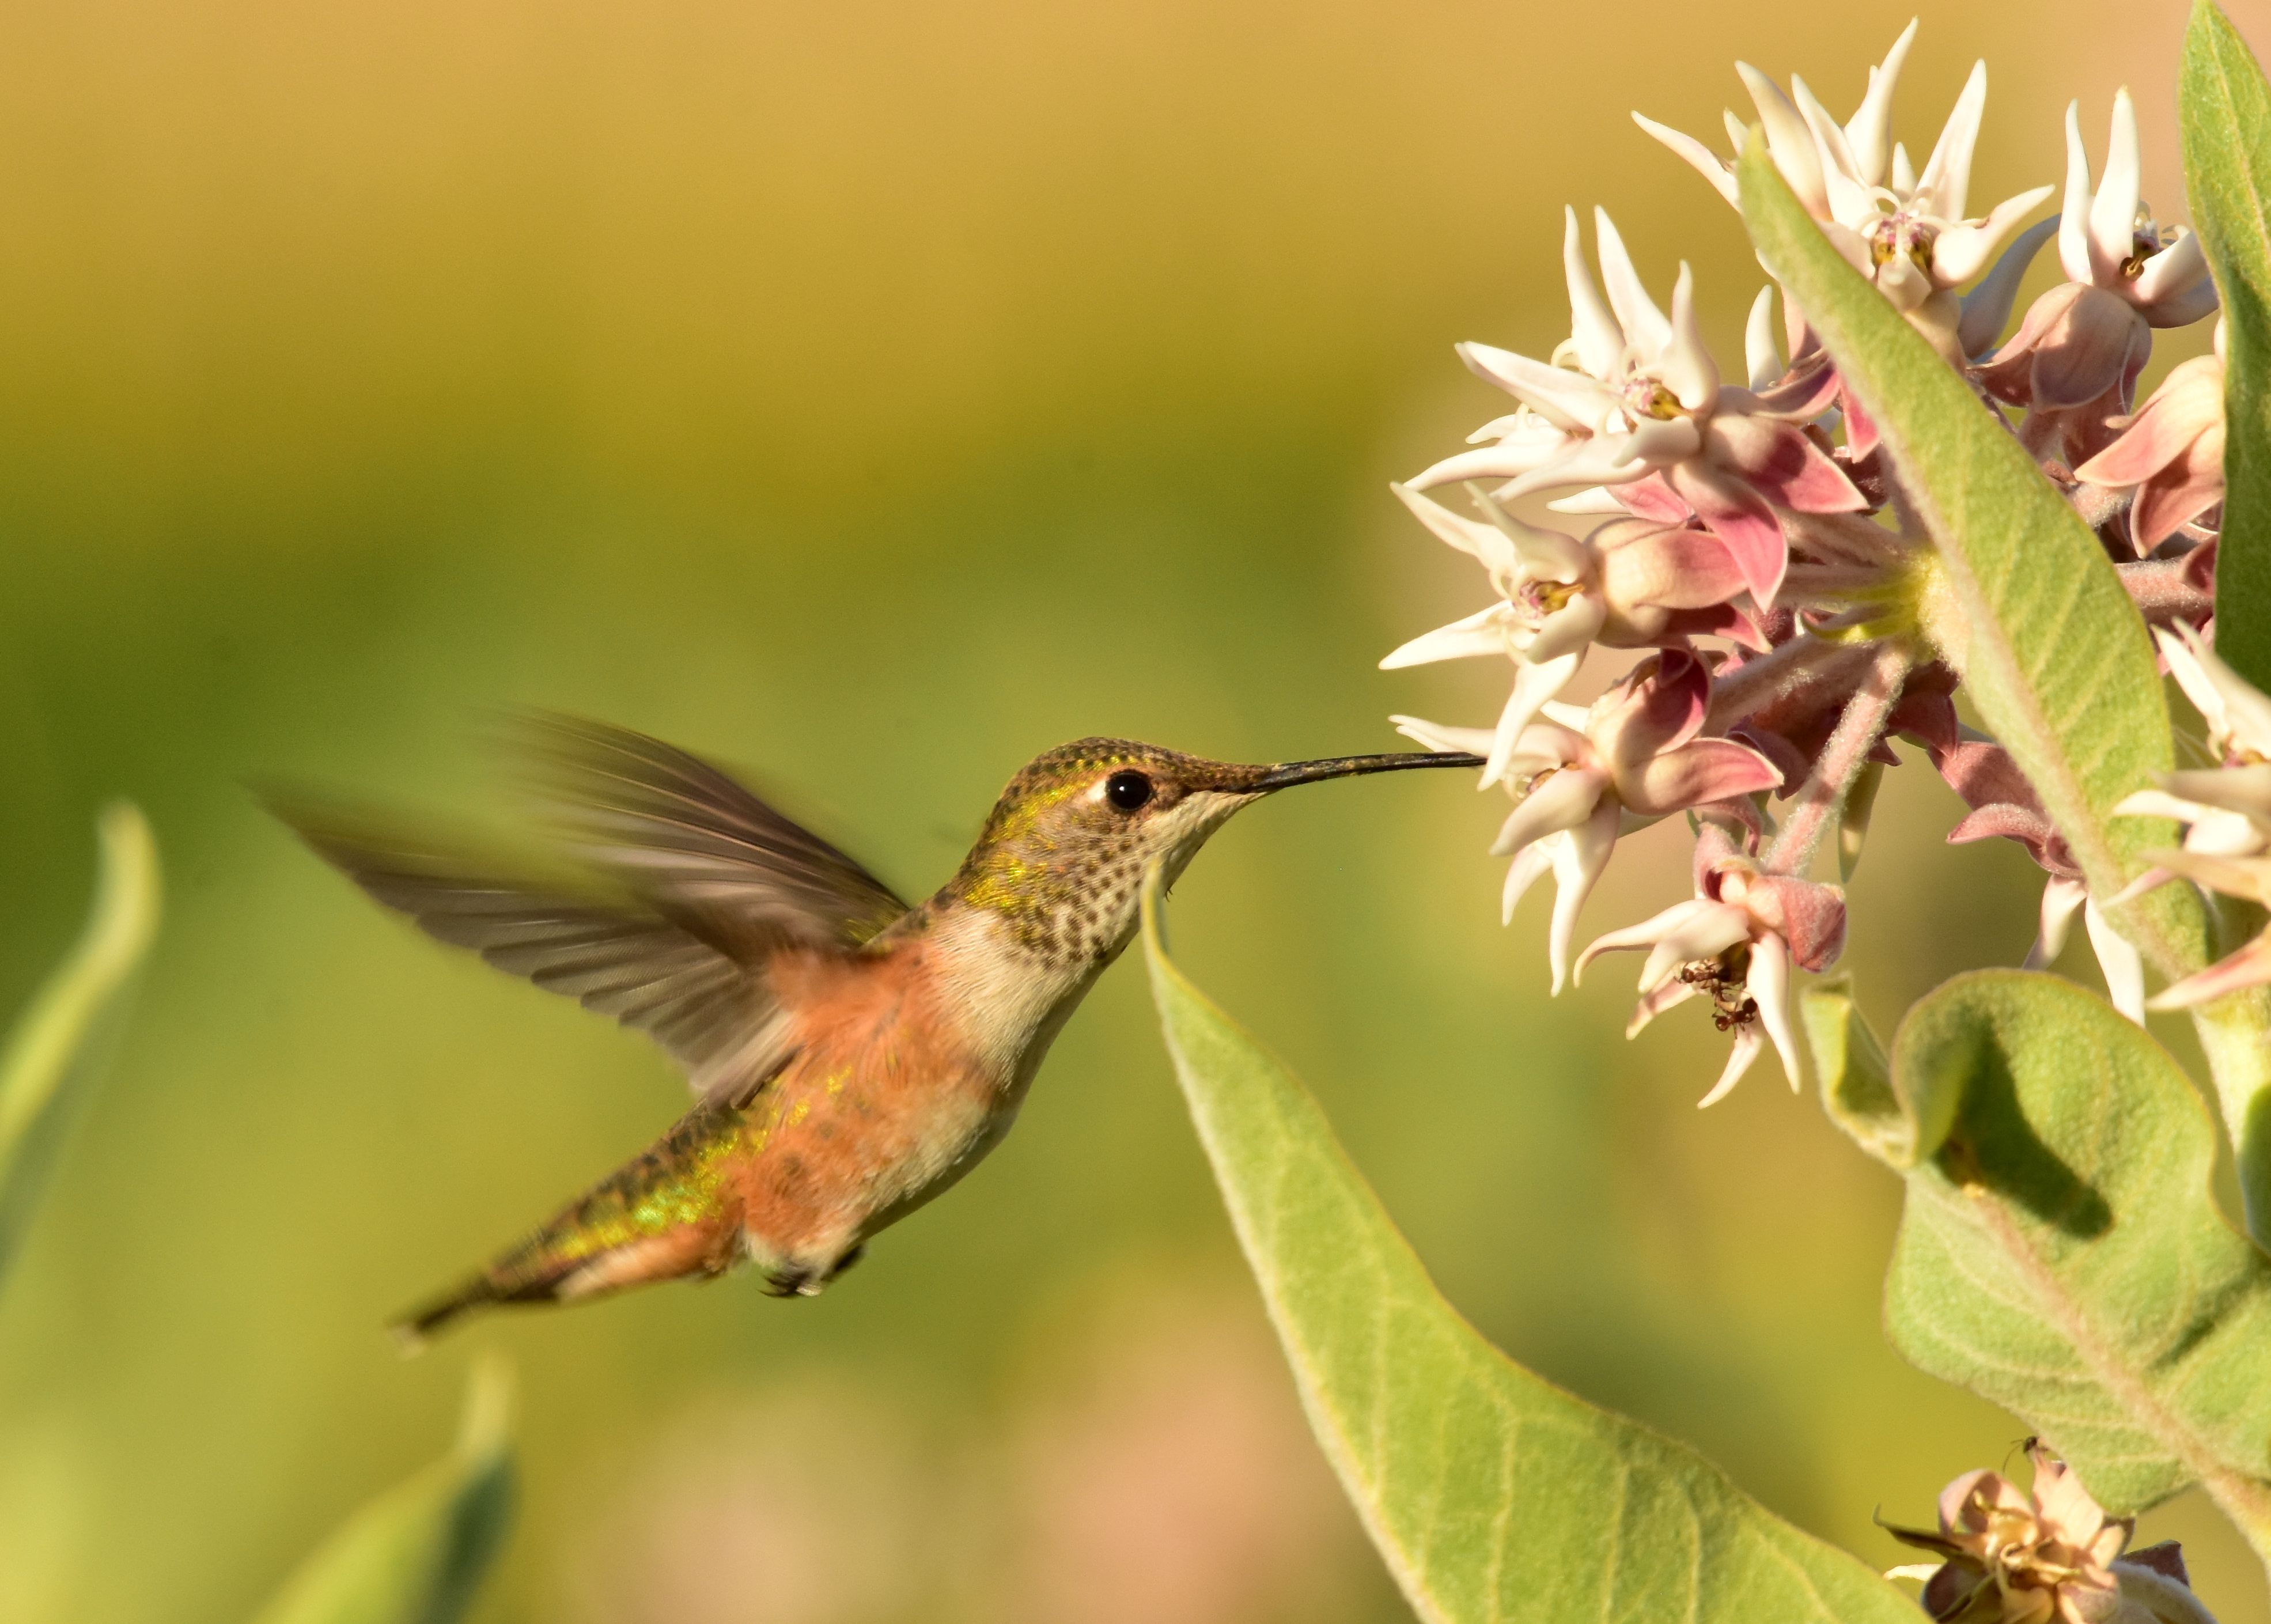 A hummingbird hovers near a blossom, about to sip nectar from it.